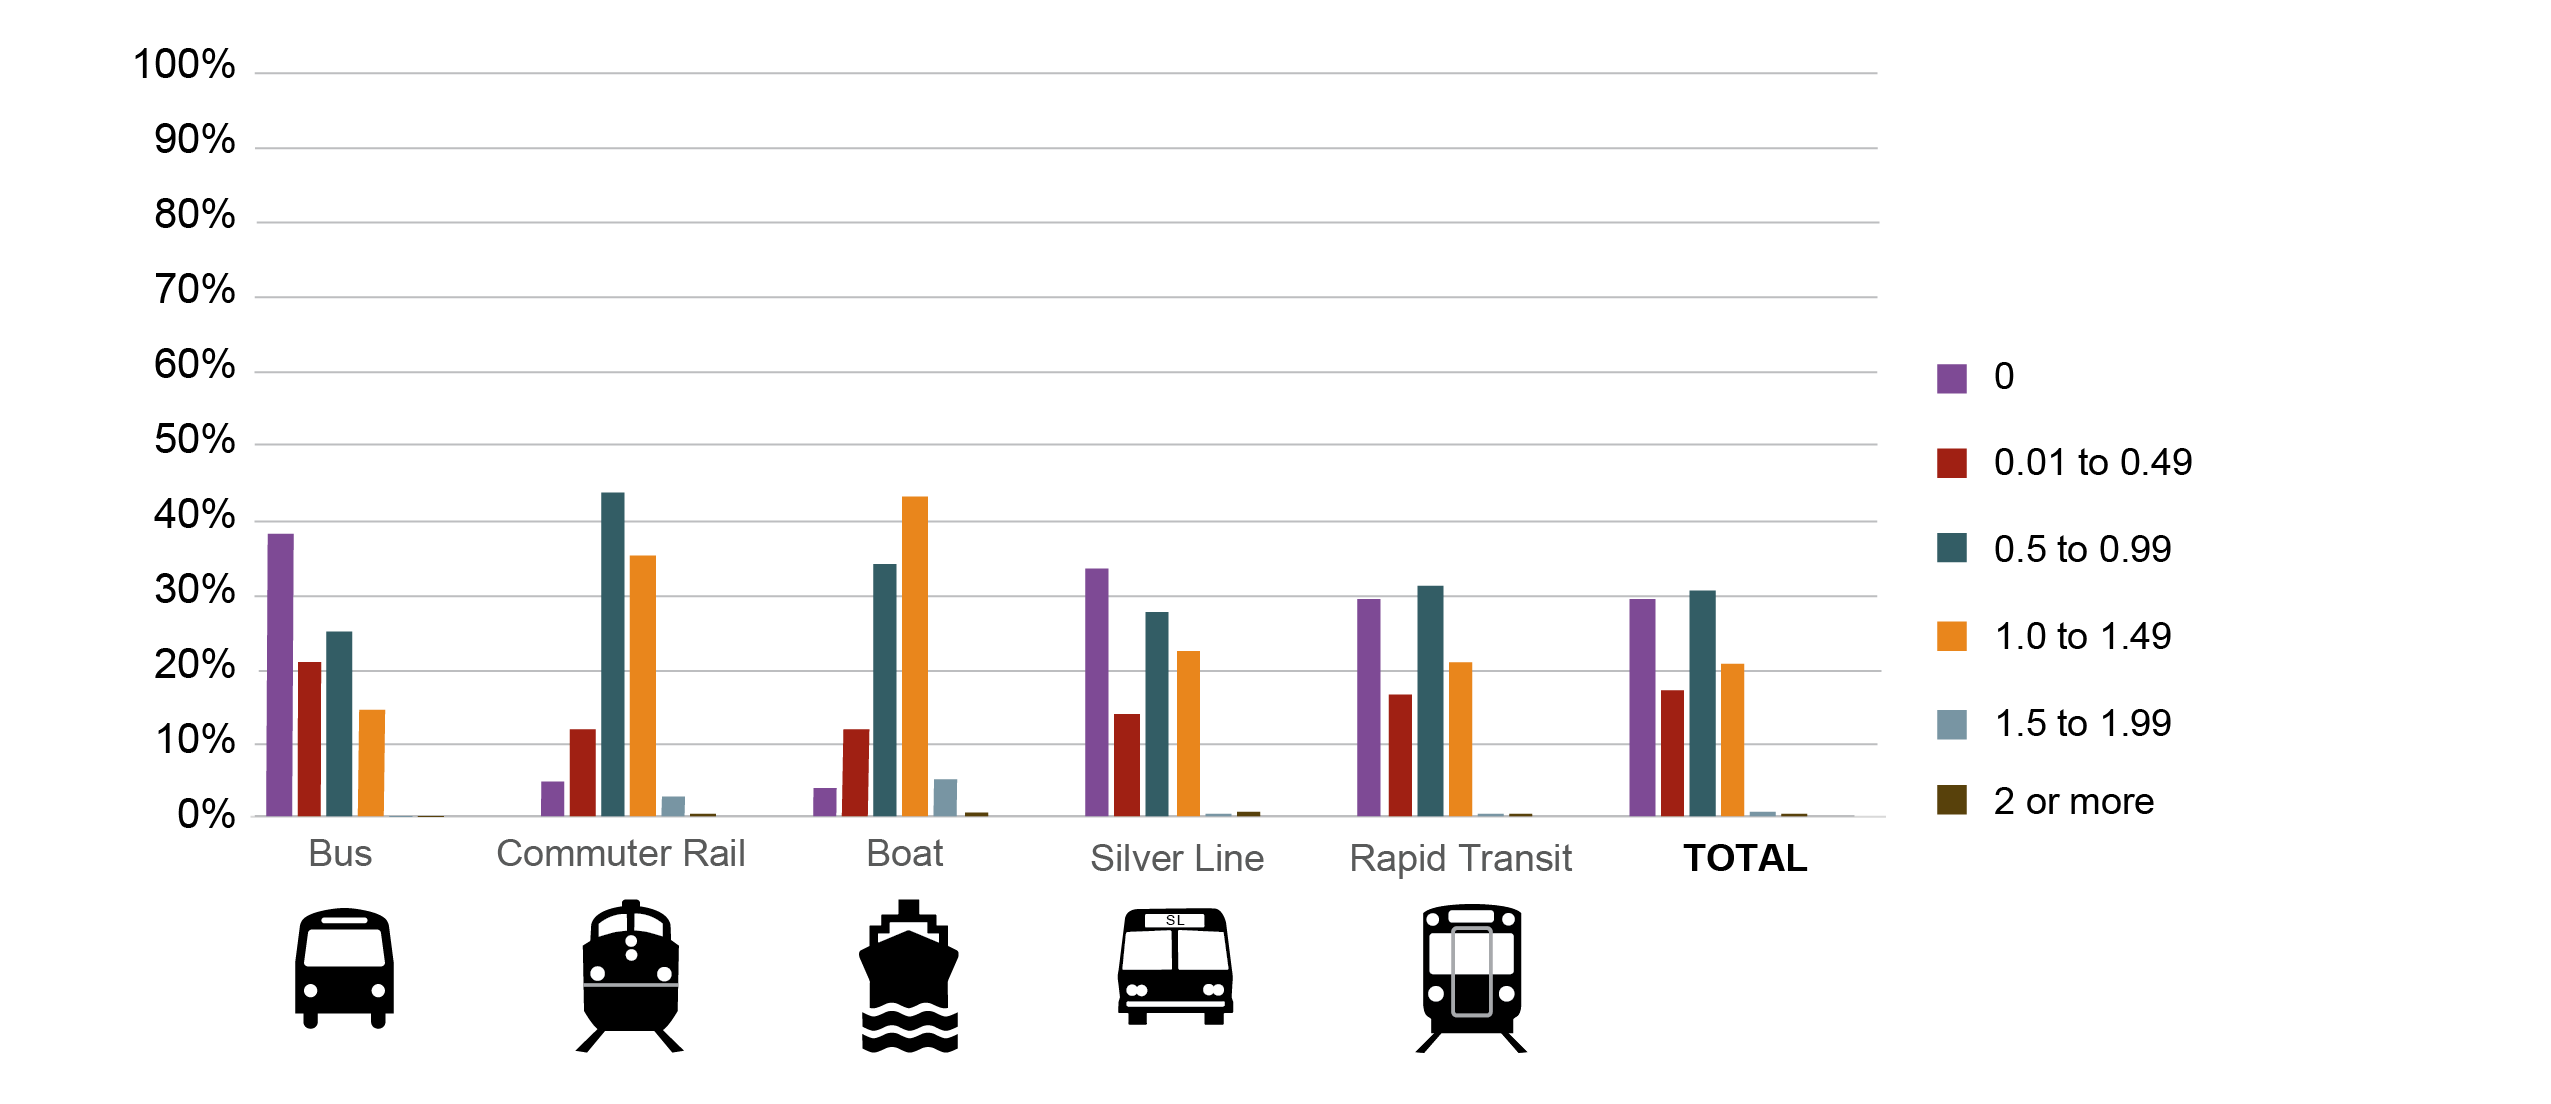 Figure 22 is a series of bar graphs showing the percentage distributions of ranges of number of usable vehicles per capita in the households of passengers using each MBTA service mode as reported in the 2015-17 survey.